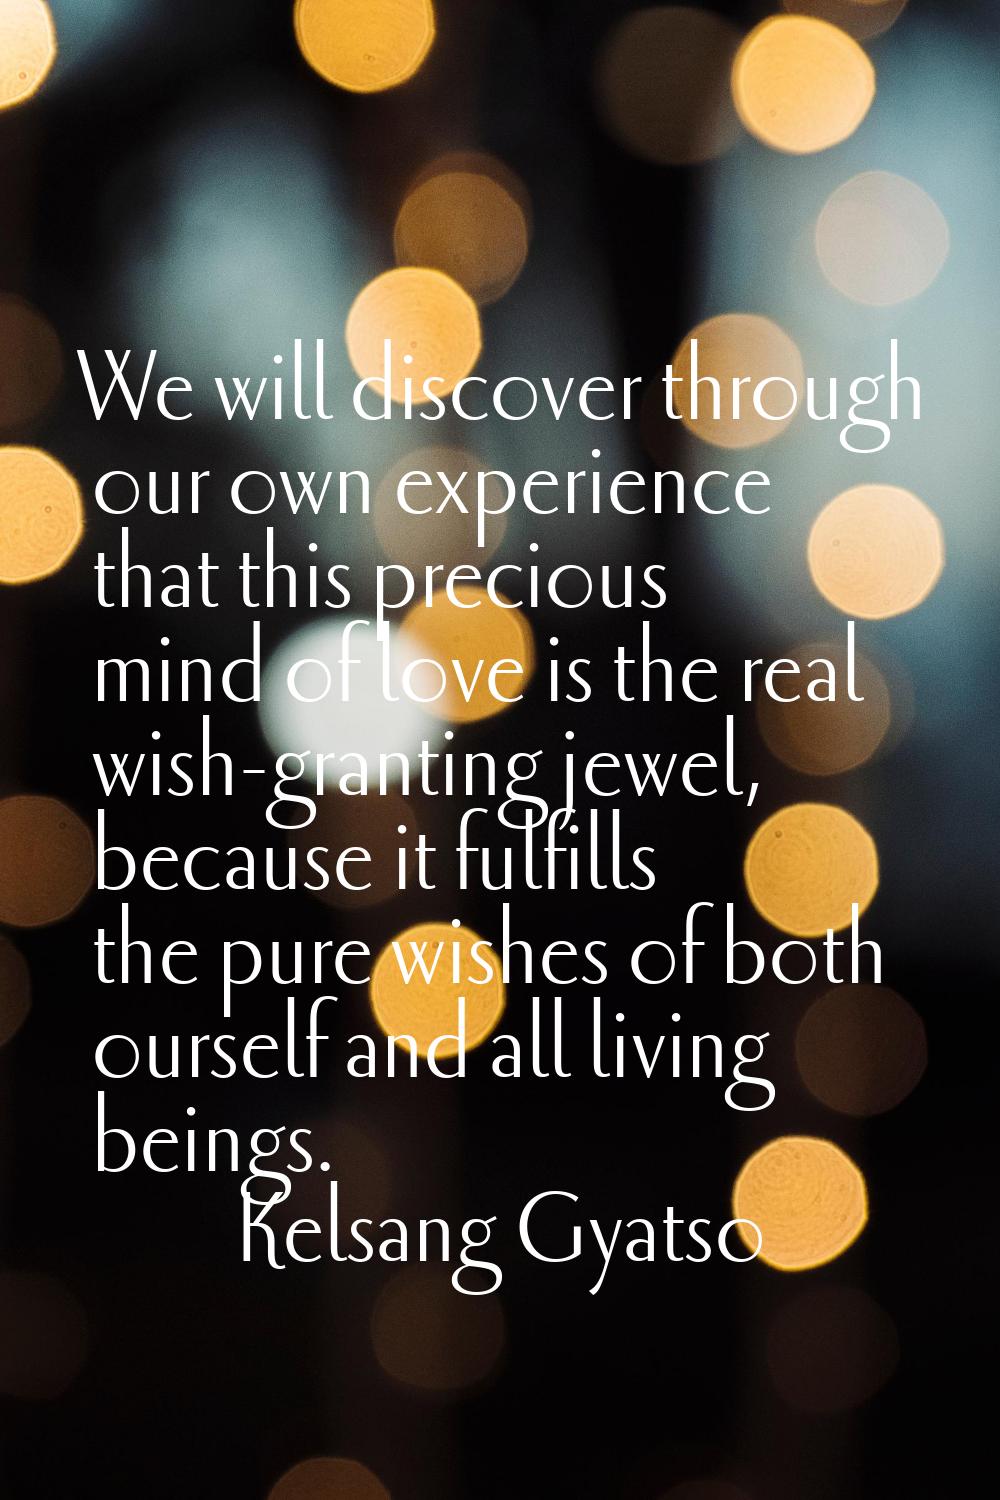 We will discover through our own experience that this precious mind of love is the real wish-granti